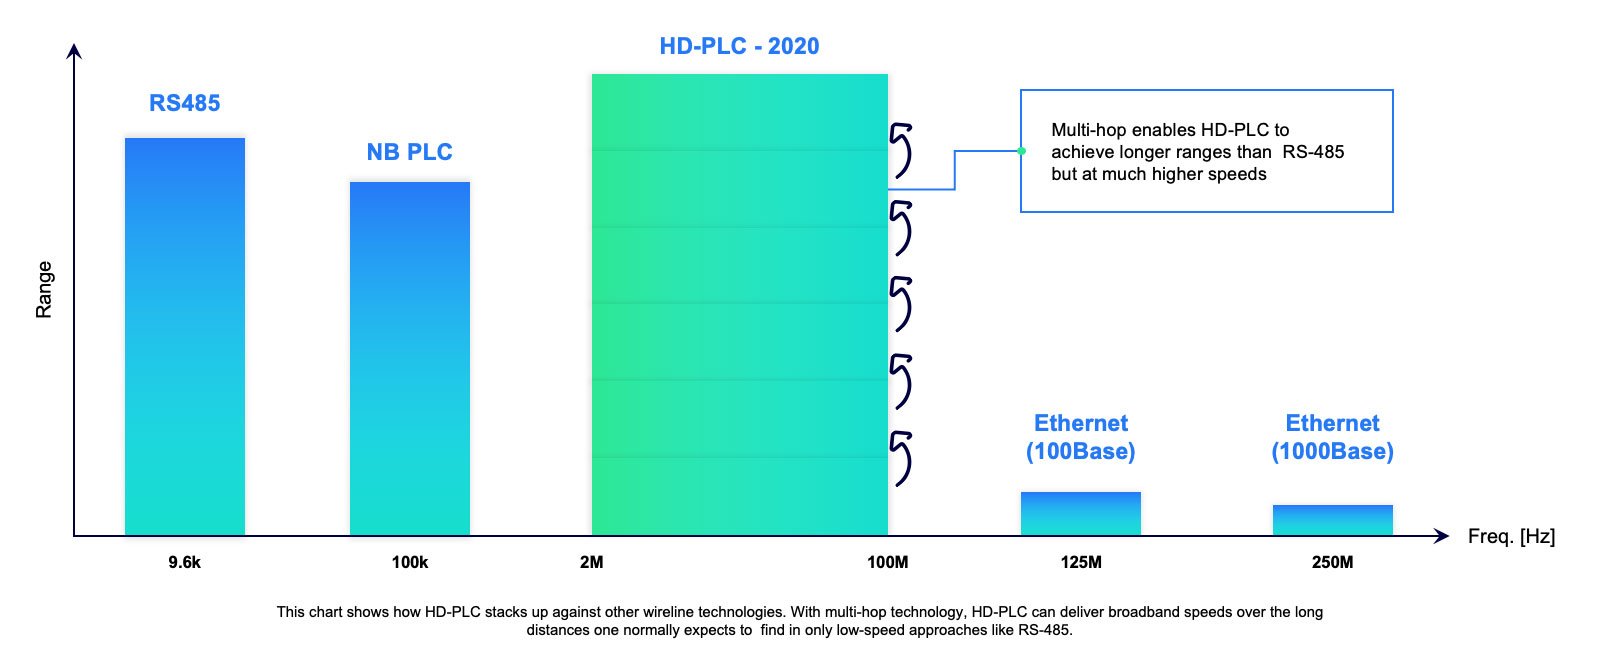 HD-PLC leaps past other technologies